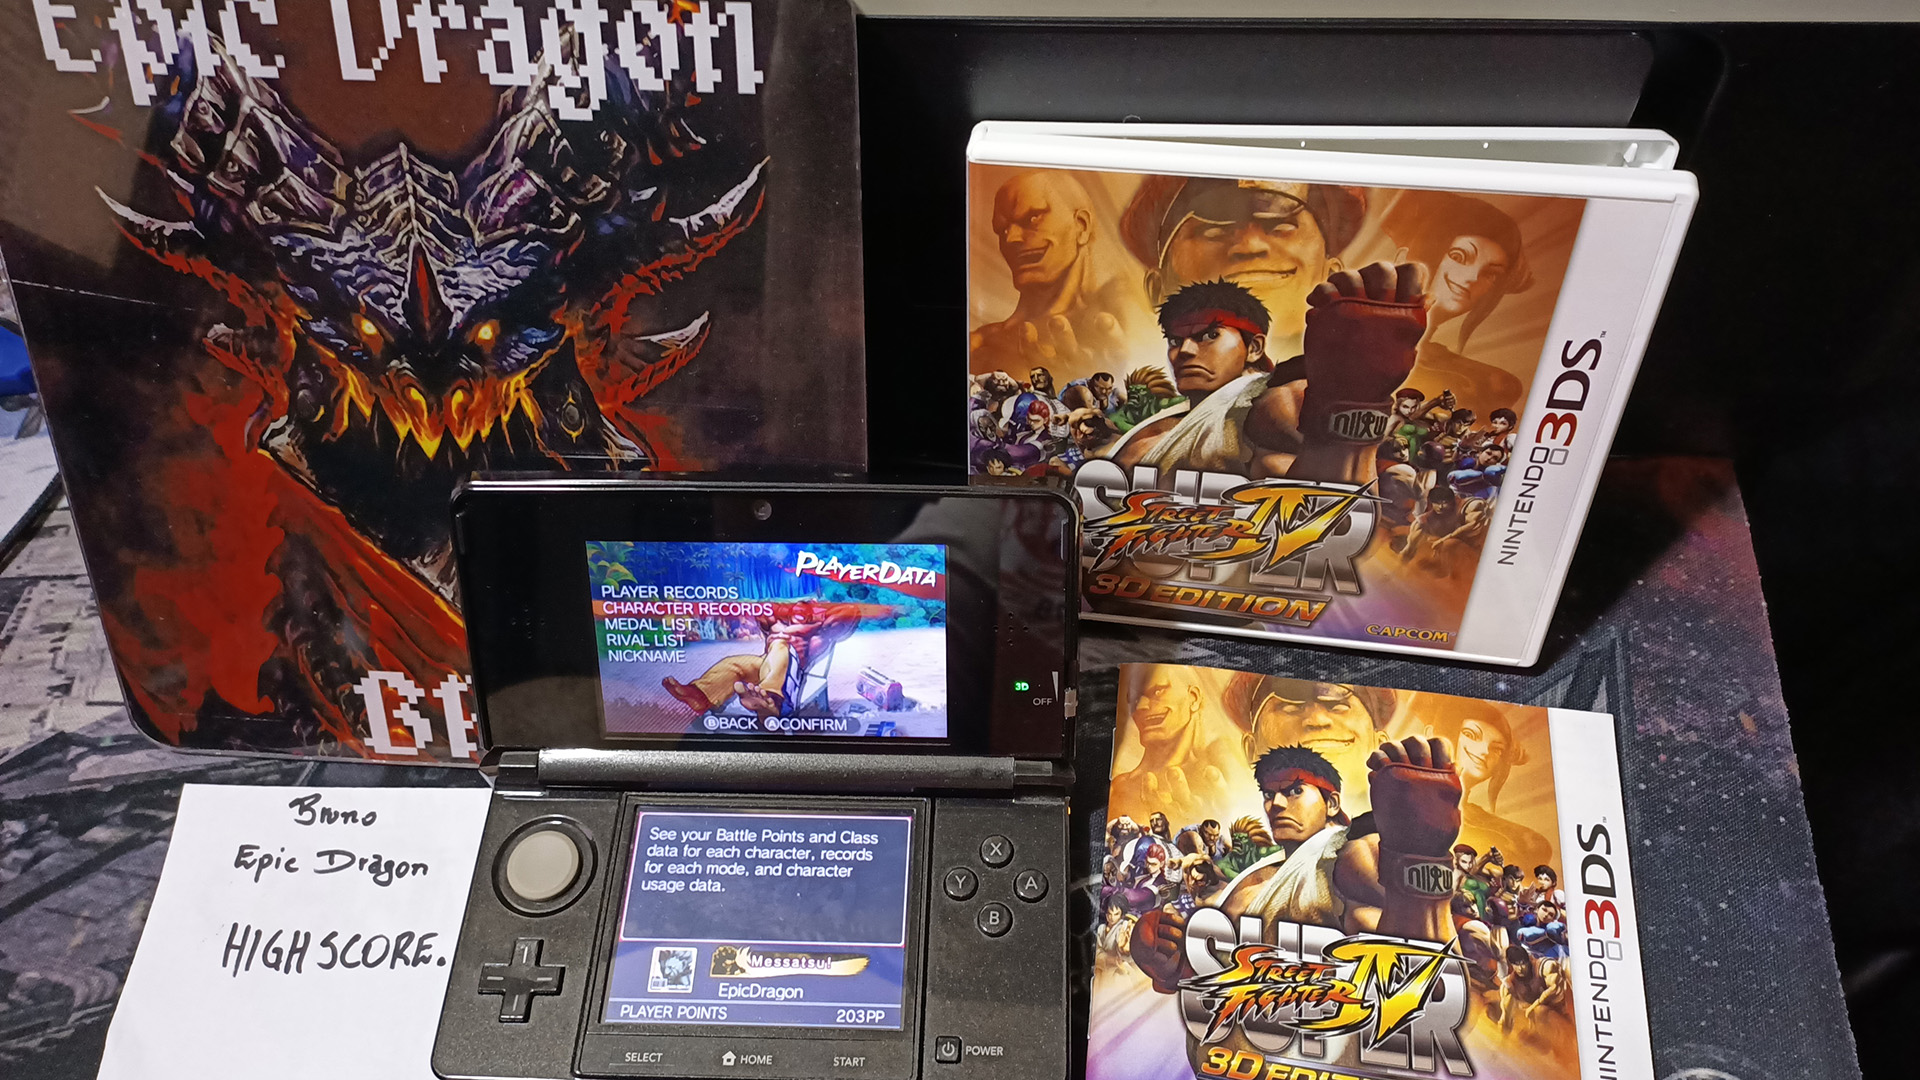 EpicDragon: Super Street Fighter IV 3D Edition: Challenge: Car Crusher: Rufus (Nintendo 3DS) 114,200 points on 2022-08-17 21:07:55